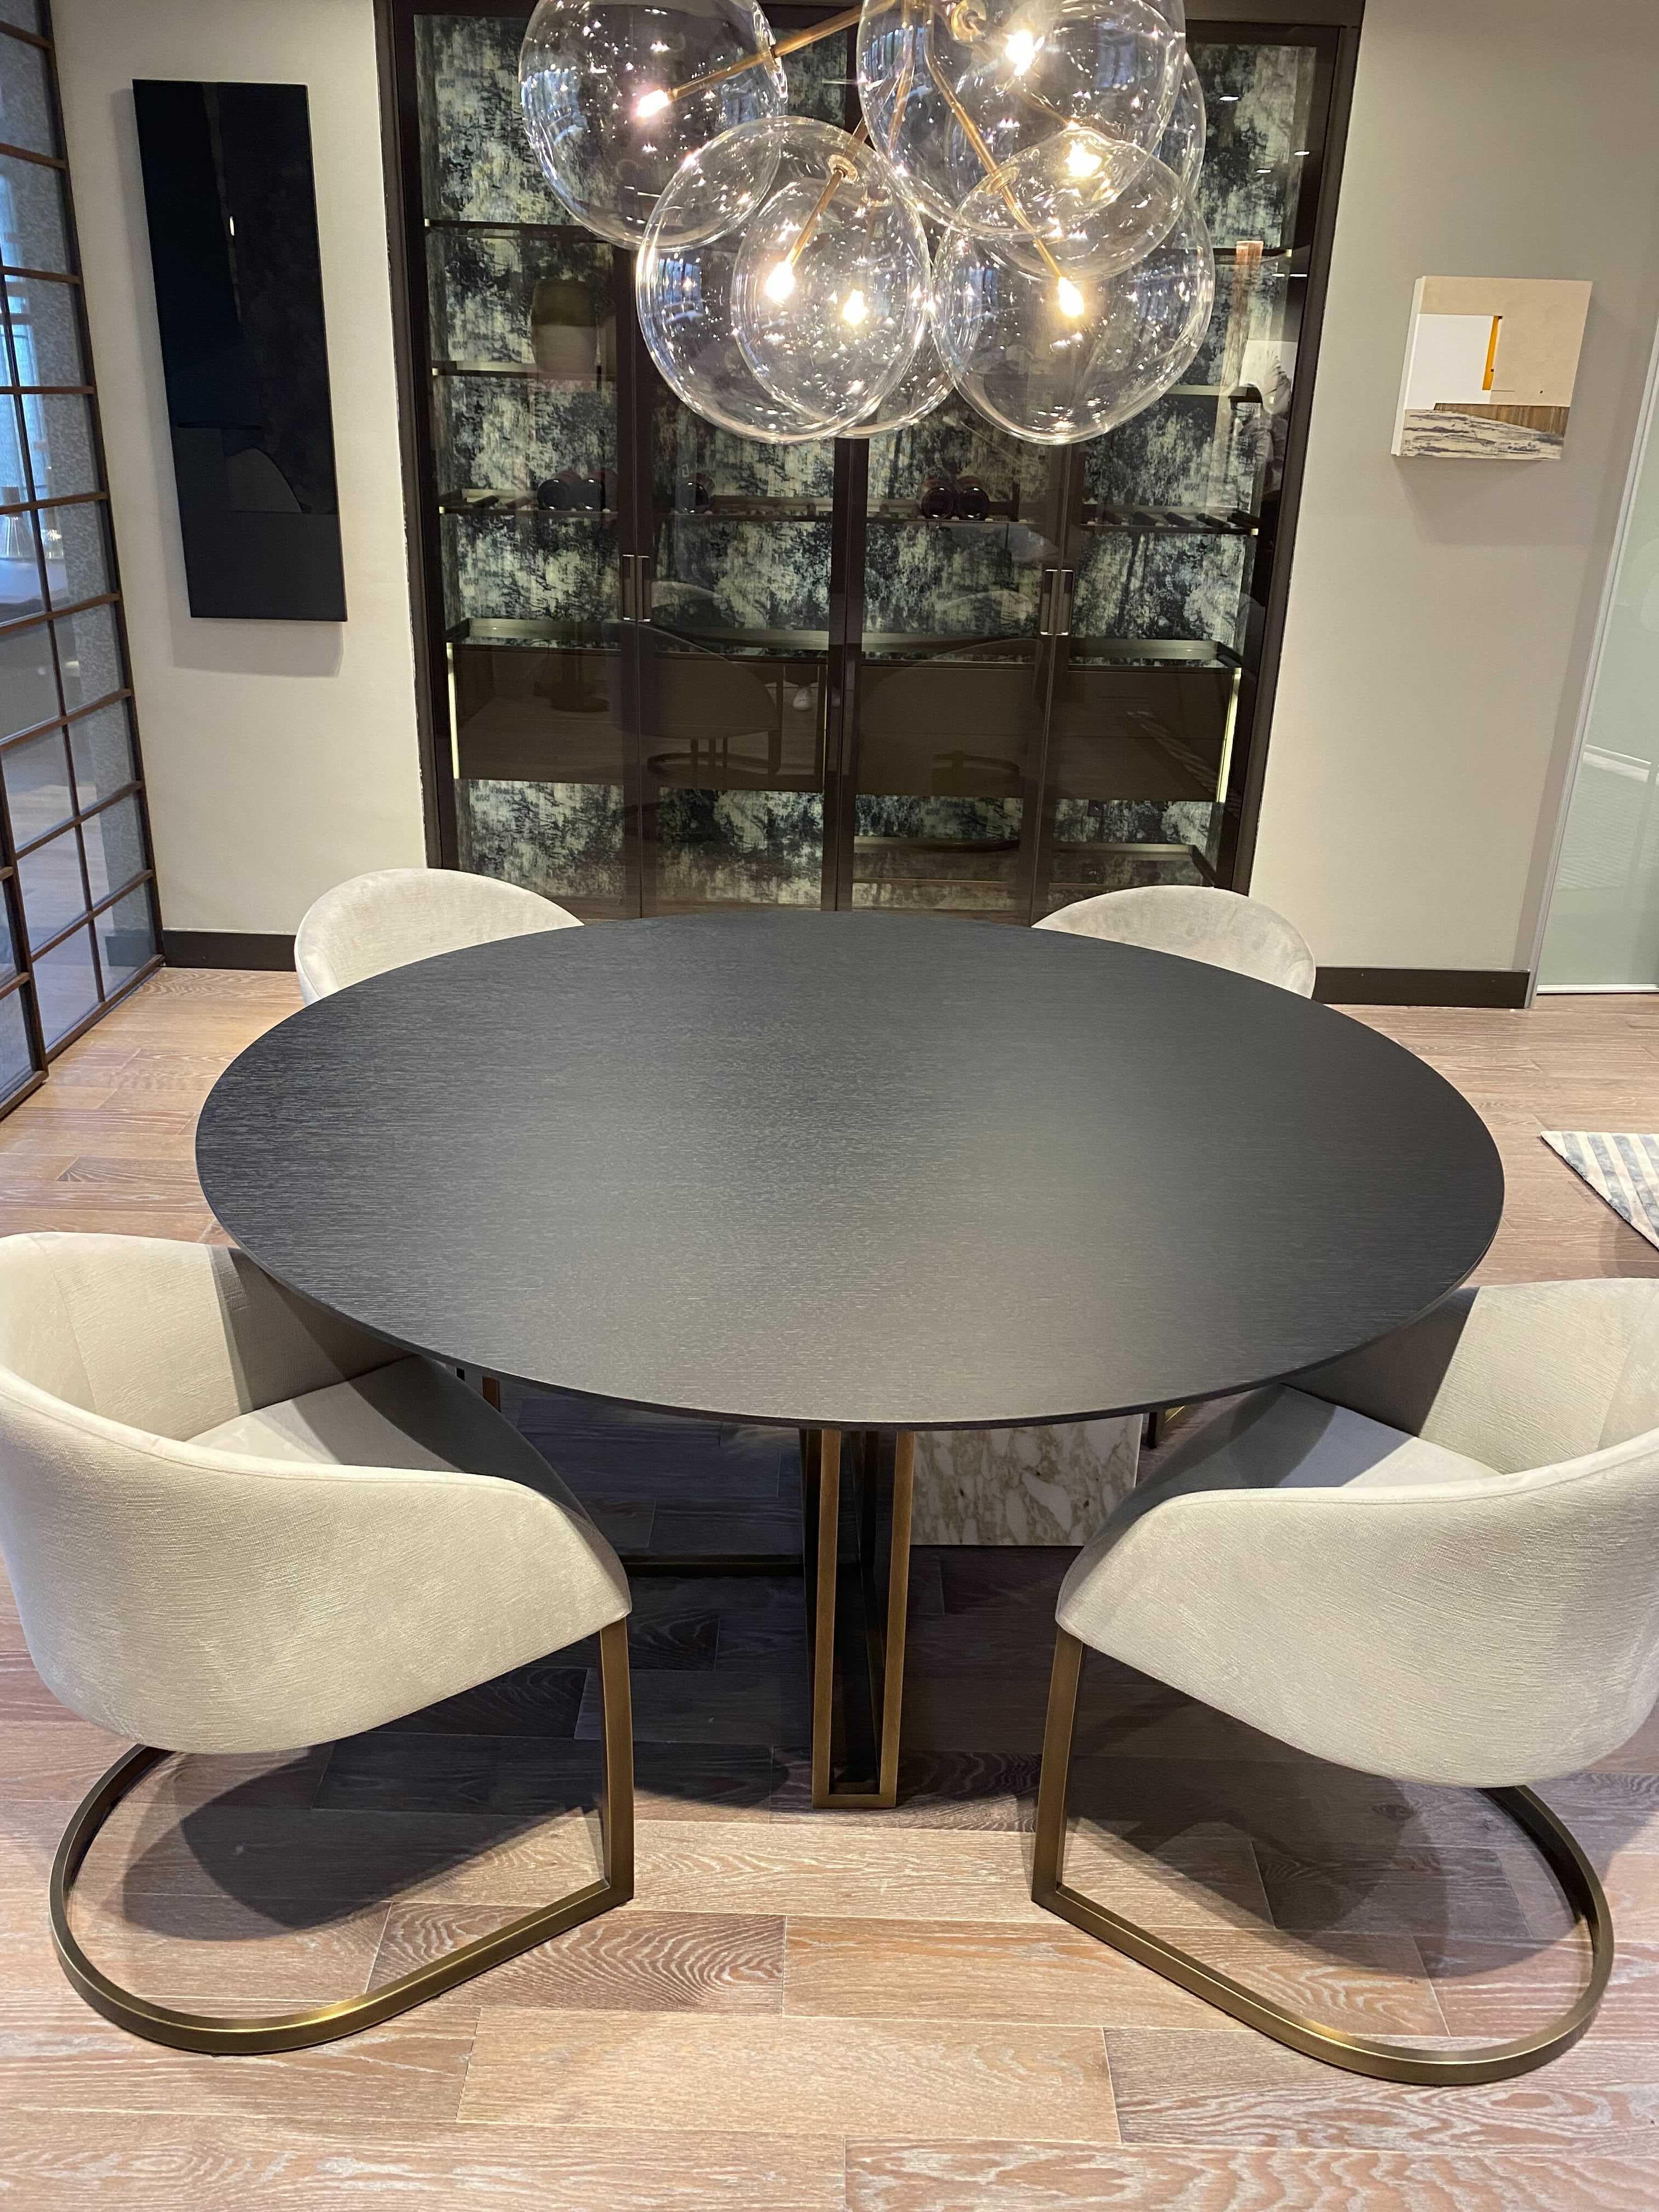 Modern Floor Sample Meridiani Plinto Table by Andrea Parisio in Dark Oak and Marble For Sale